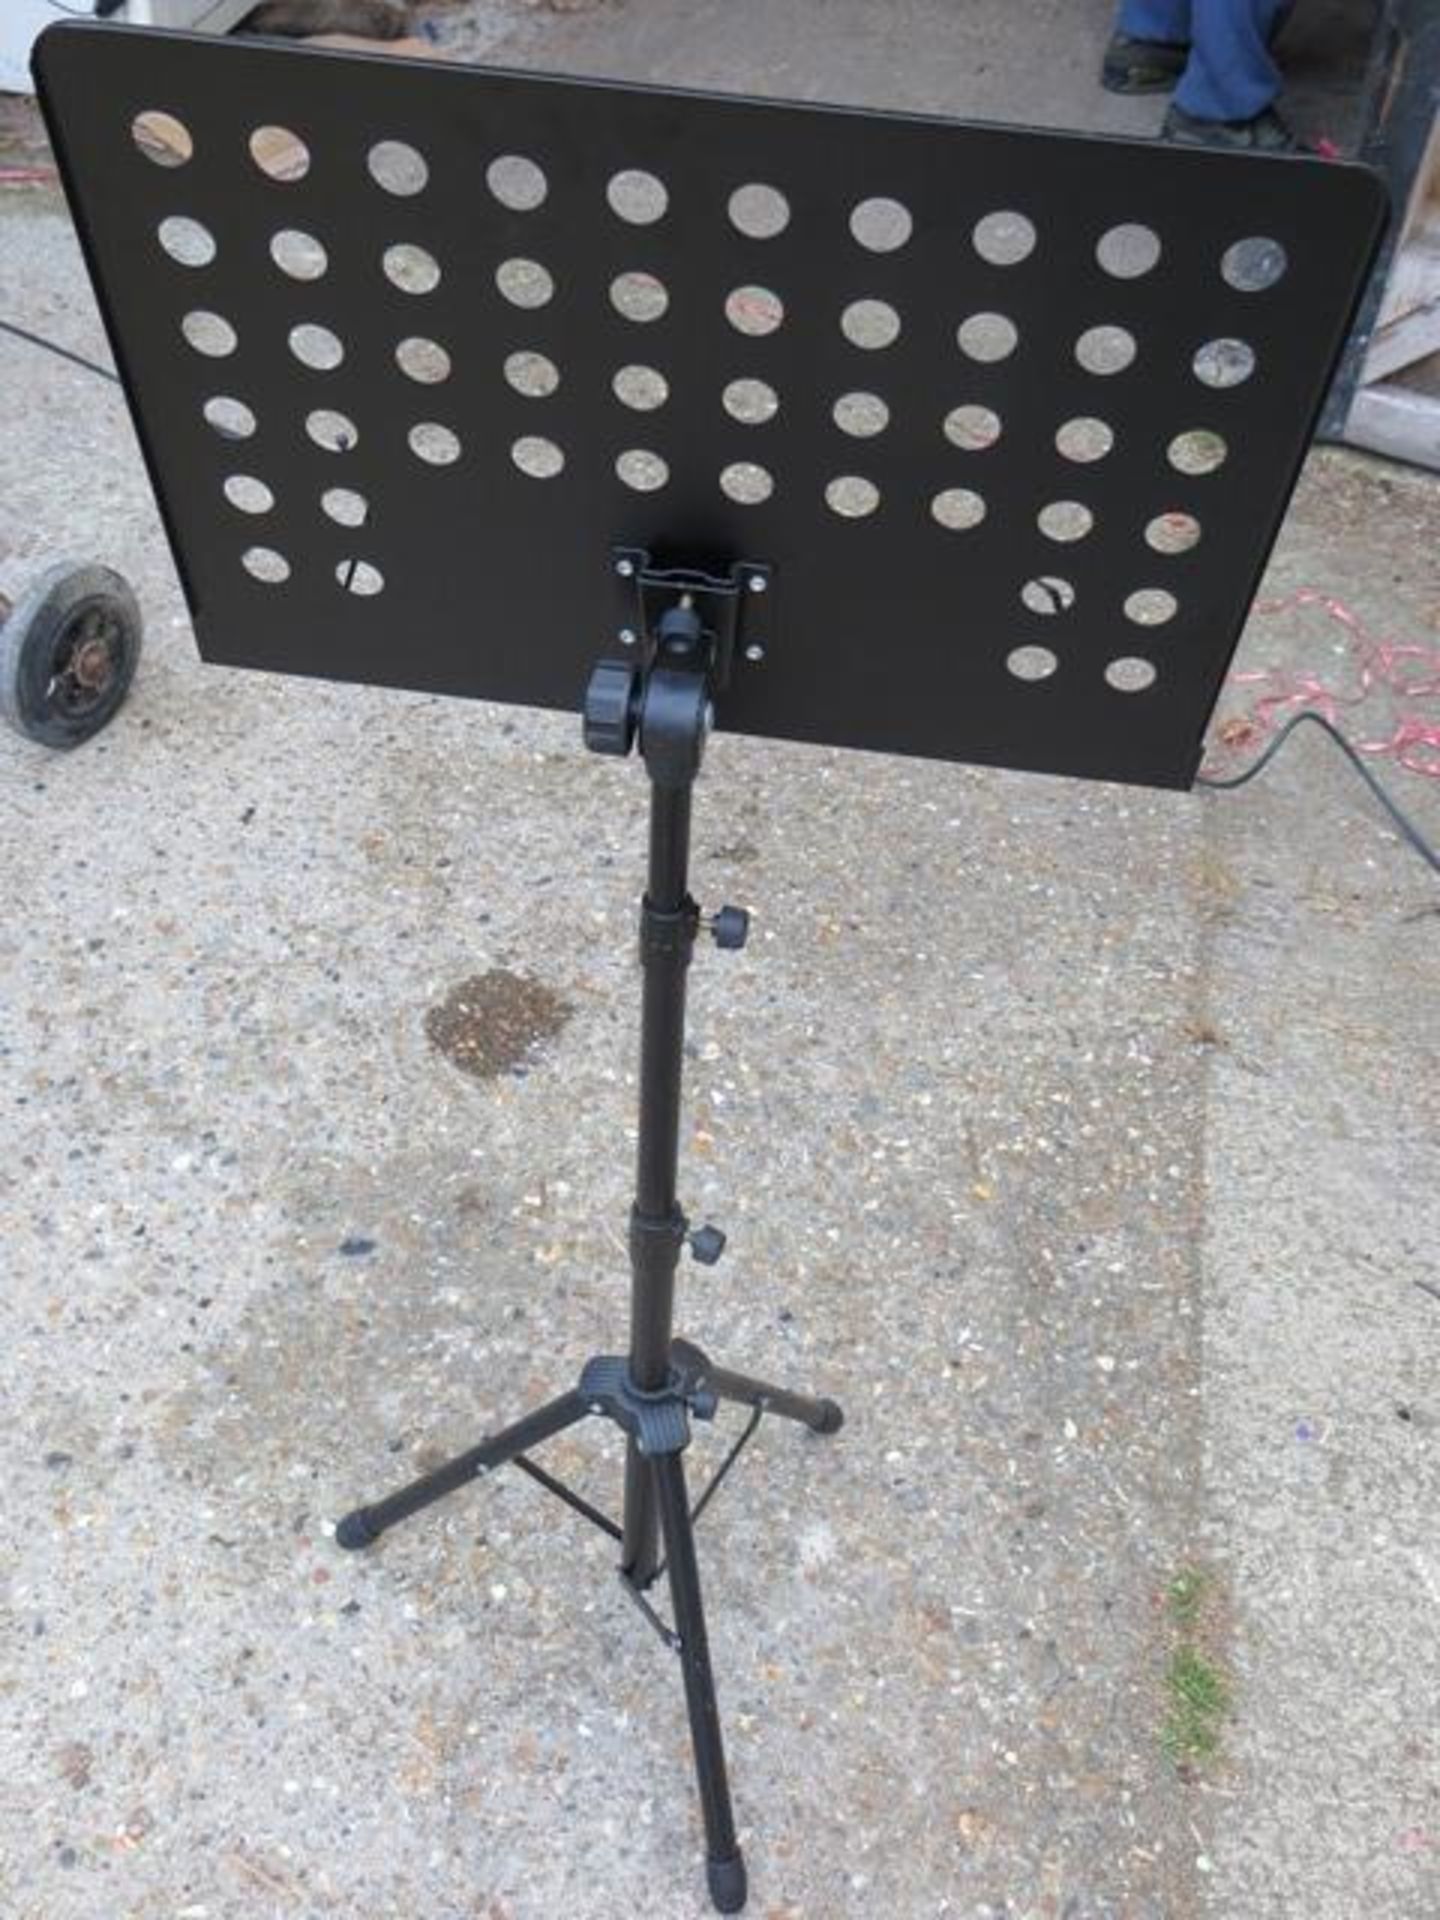 Thirty Seven Black Orchestral Sheet Music Stand Holders, adjustable height with tripod basePlease - Image 2 of 2